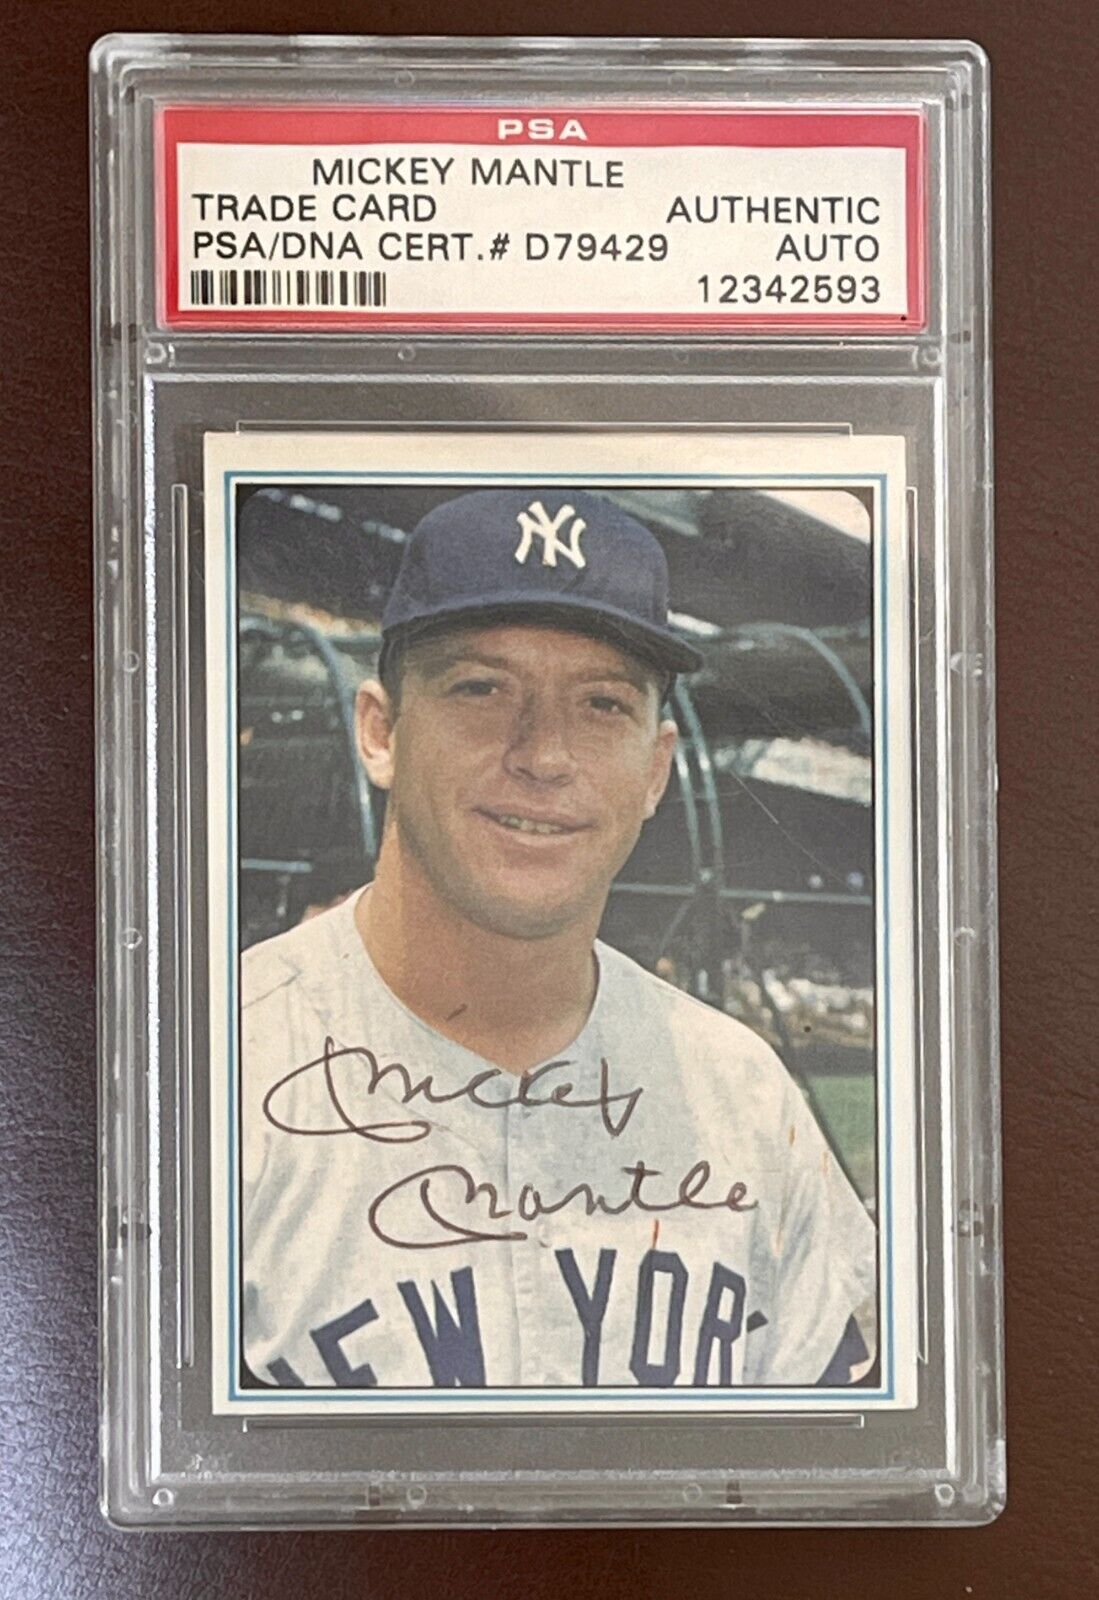 MICKEY MANTLE 1982 ASA MANTLE STORY AUTOGRAPH CARD #1 PSA/DNA CERTIFIED. YANKEES